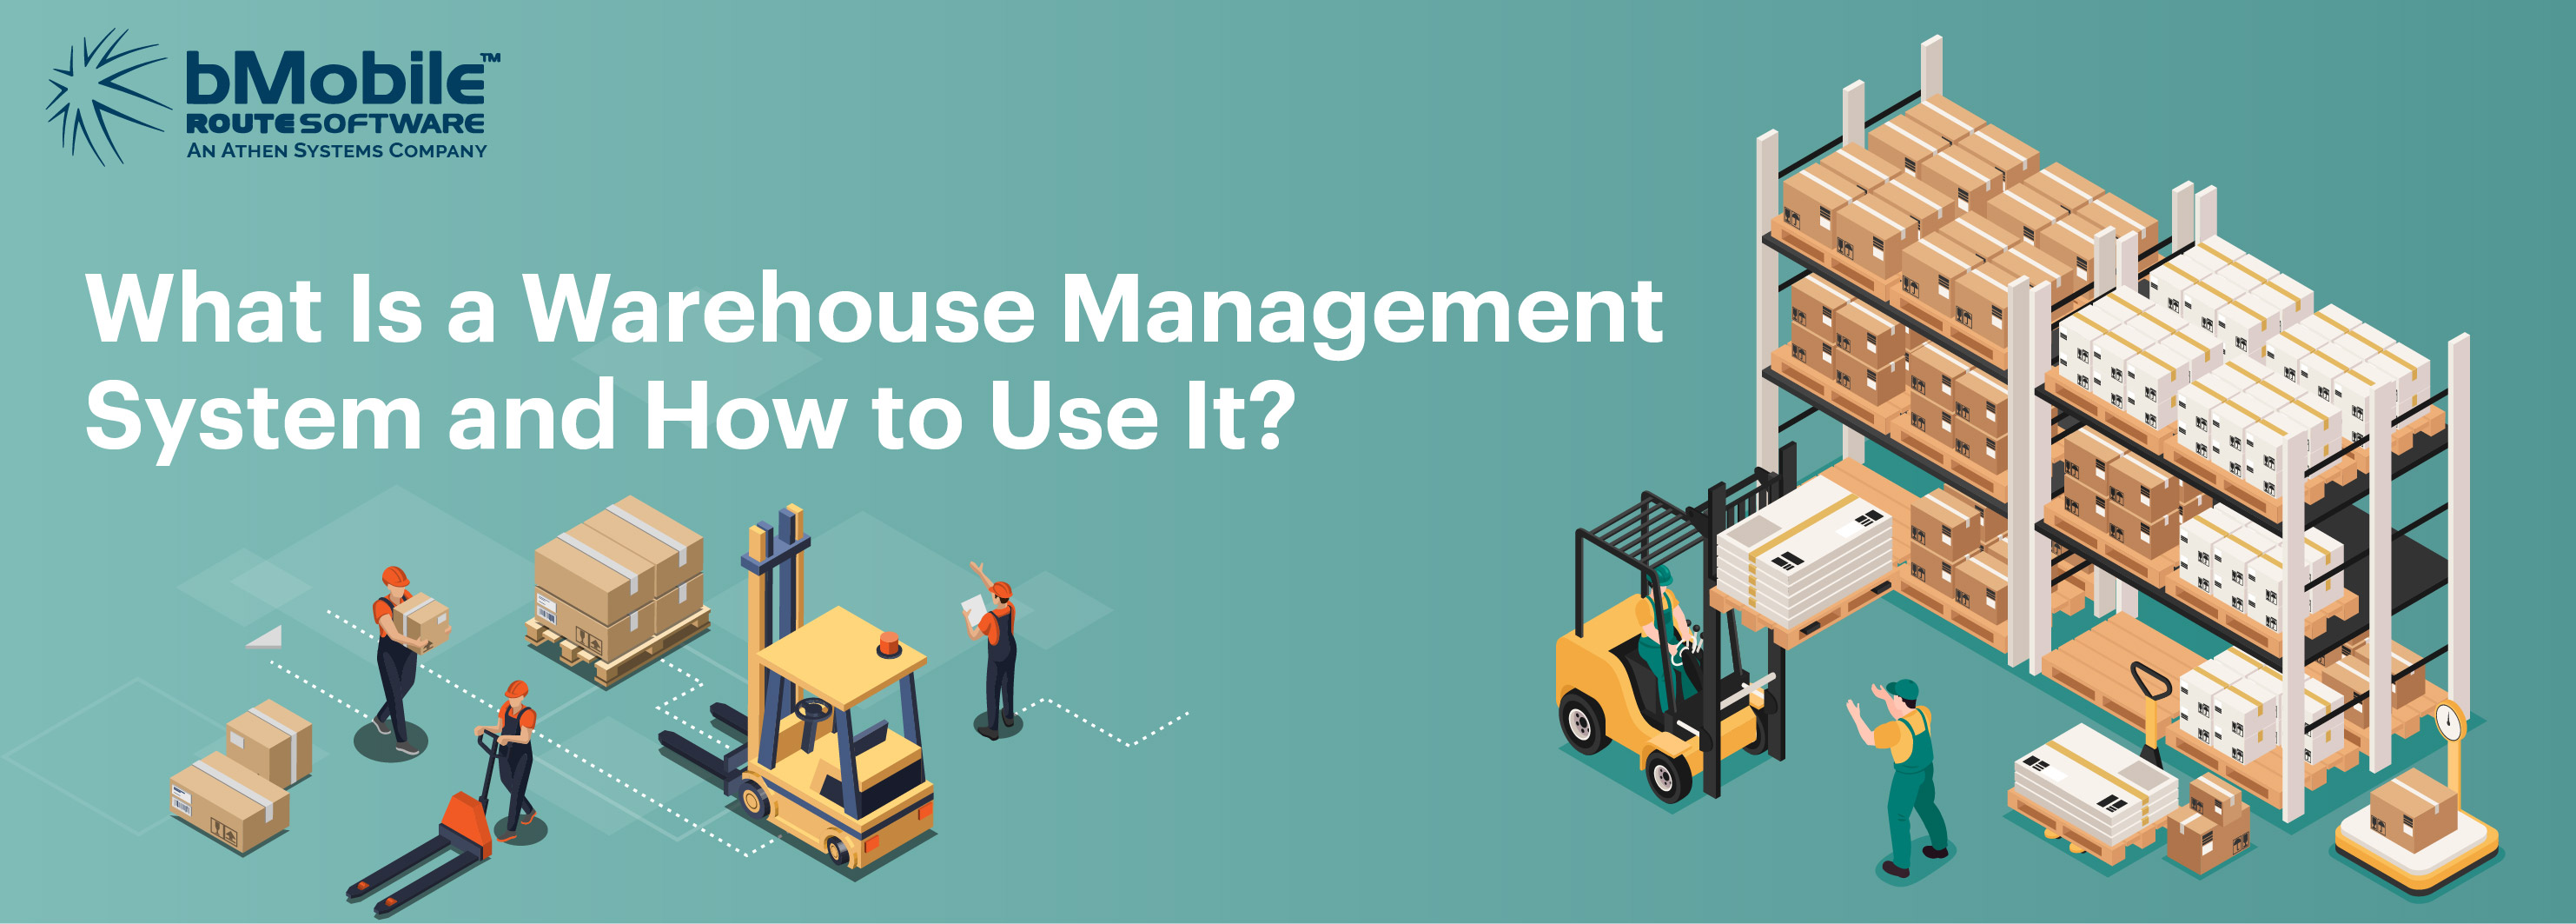 What Is a Warehouse Management System and How to Use It?